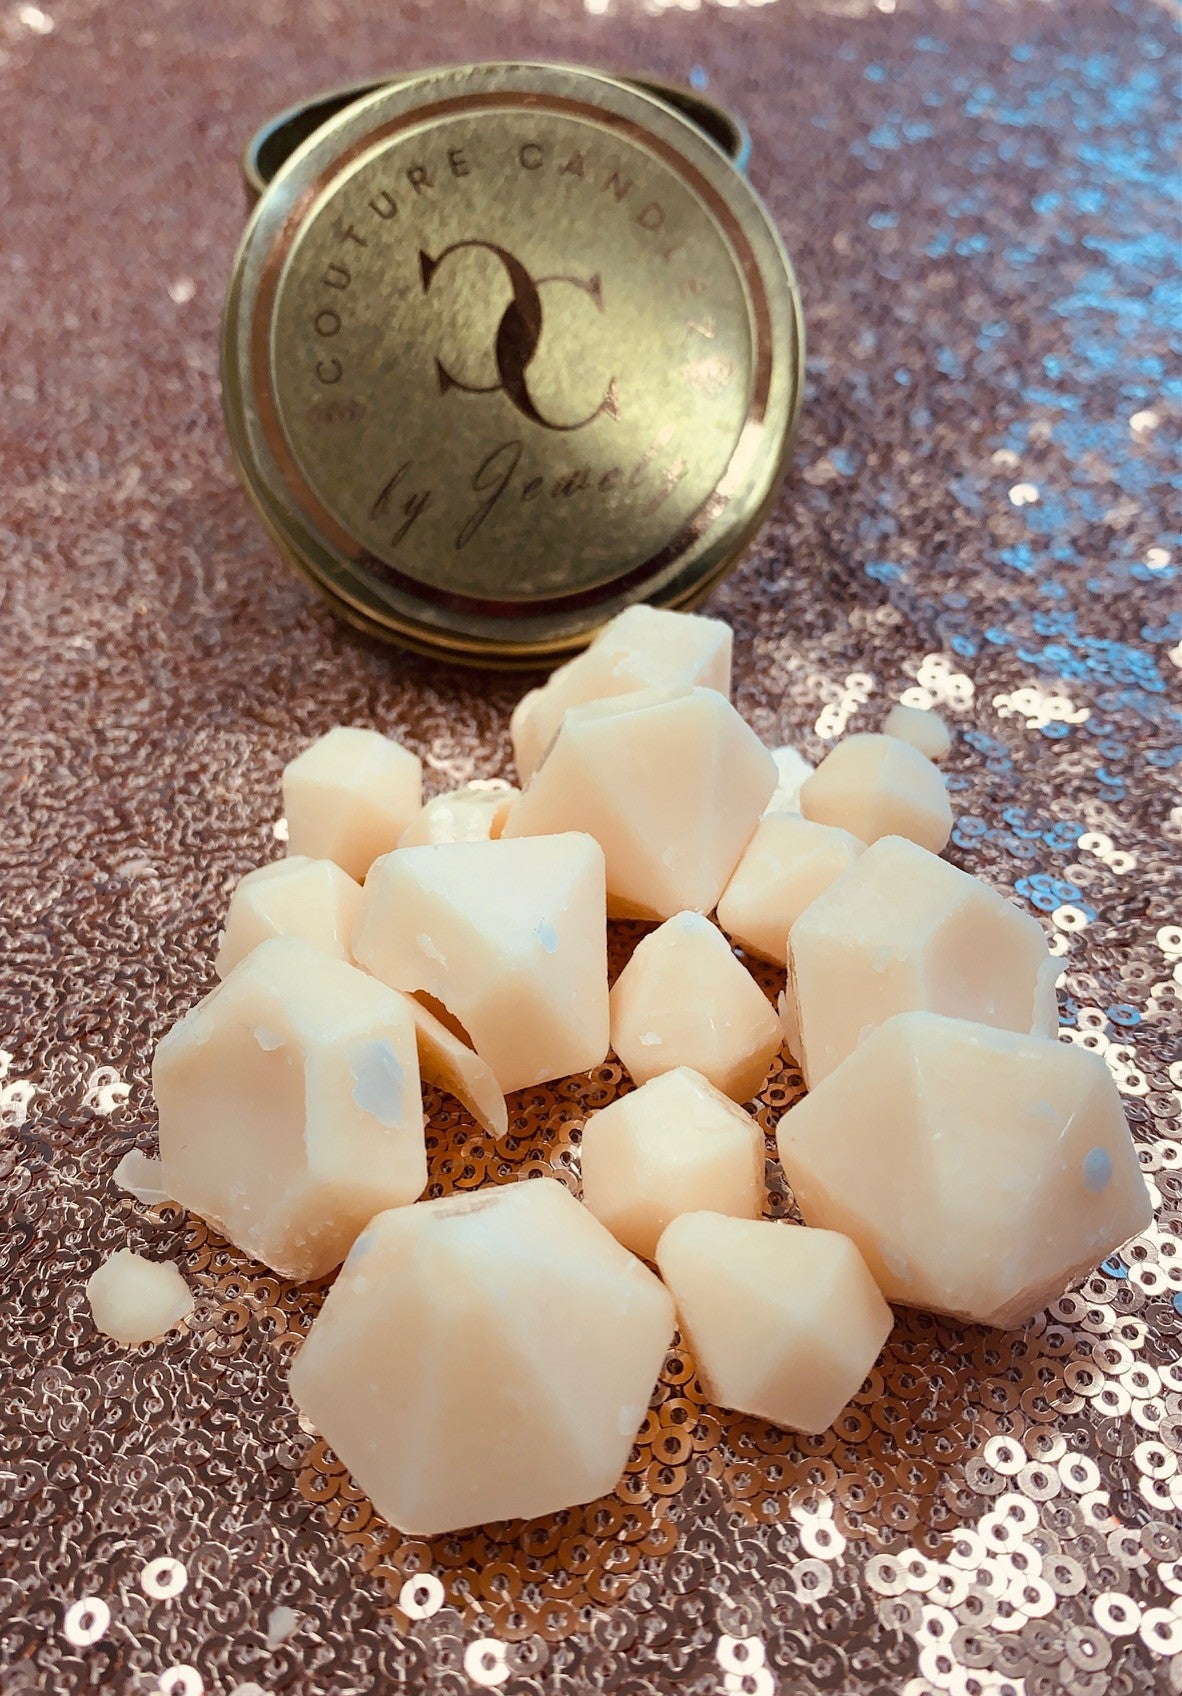 Couture Candlez by Jewelz luxury wax melts with notes of lemon, sage, & vanilla (Ghana Glam)